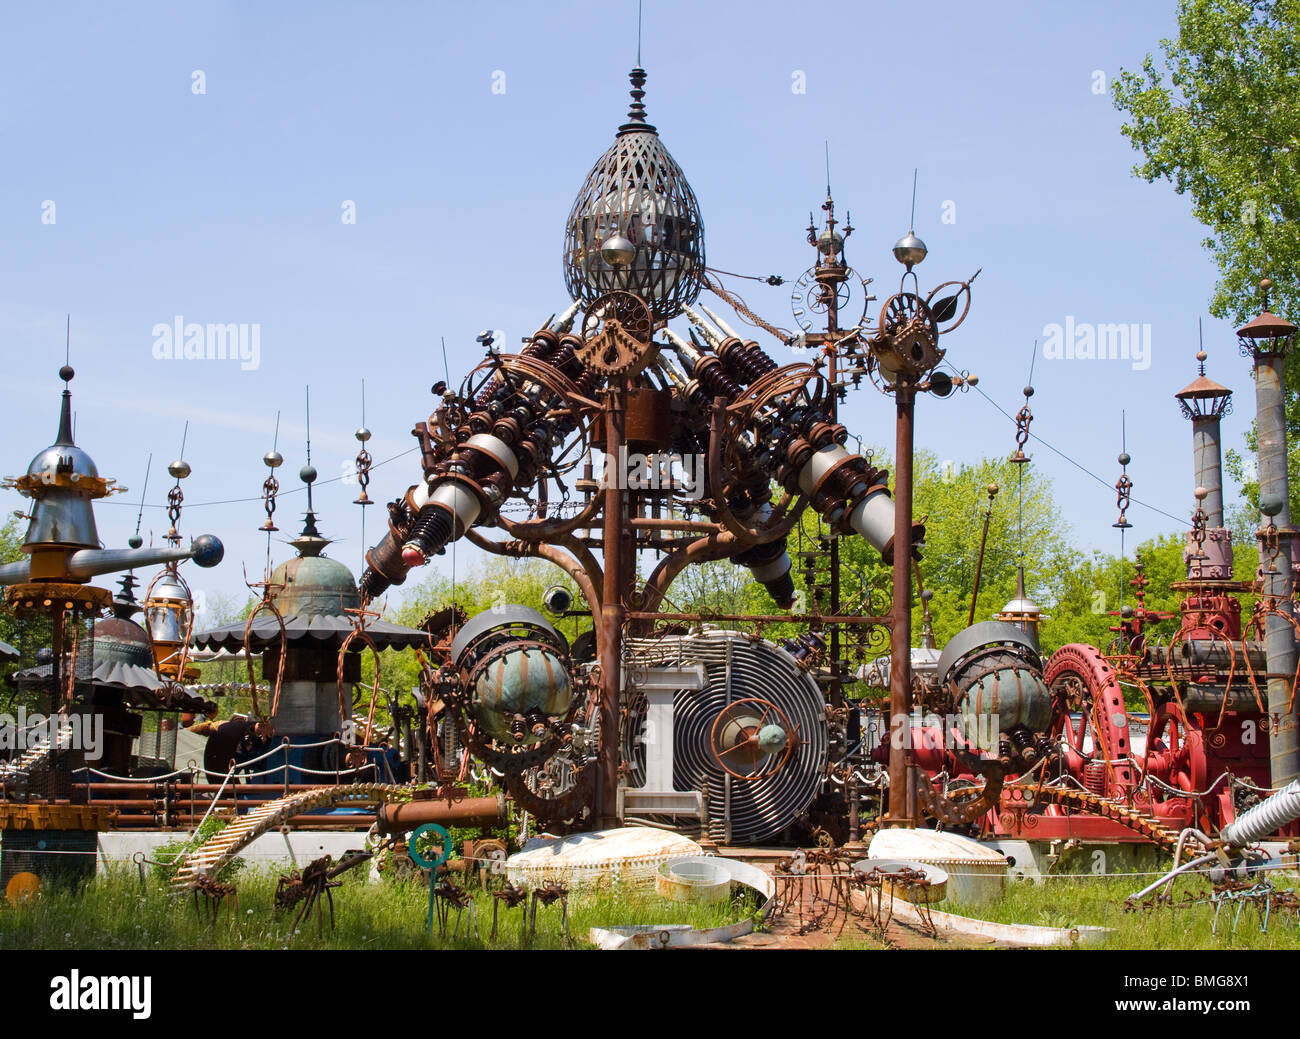 Dr Evermor Forevertron metal sculptures in Baraboo Wisconsin Stock Photo